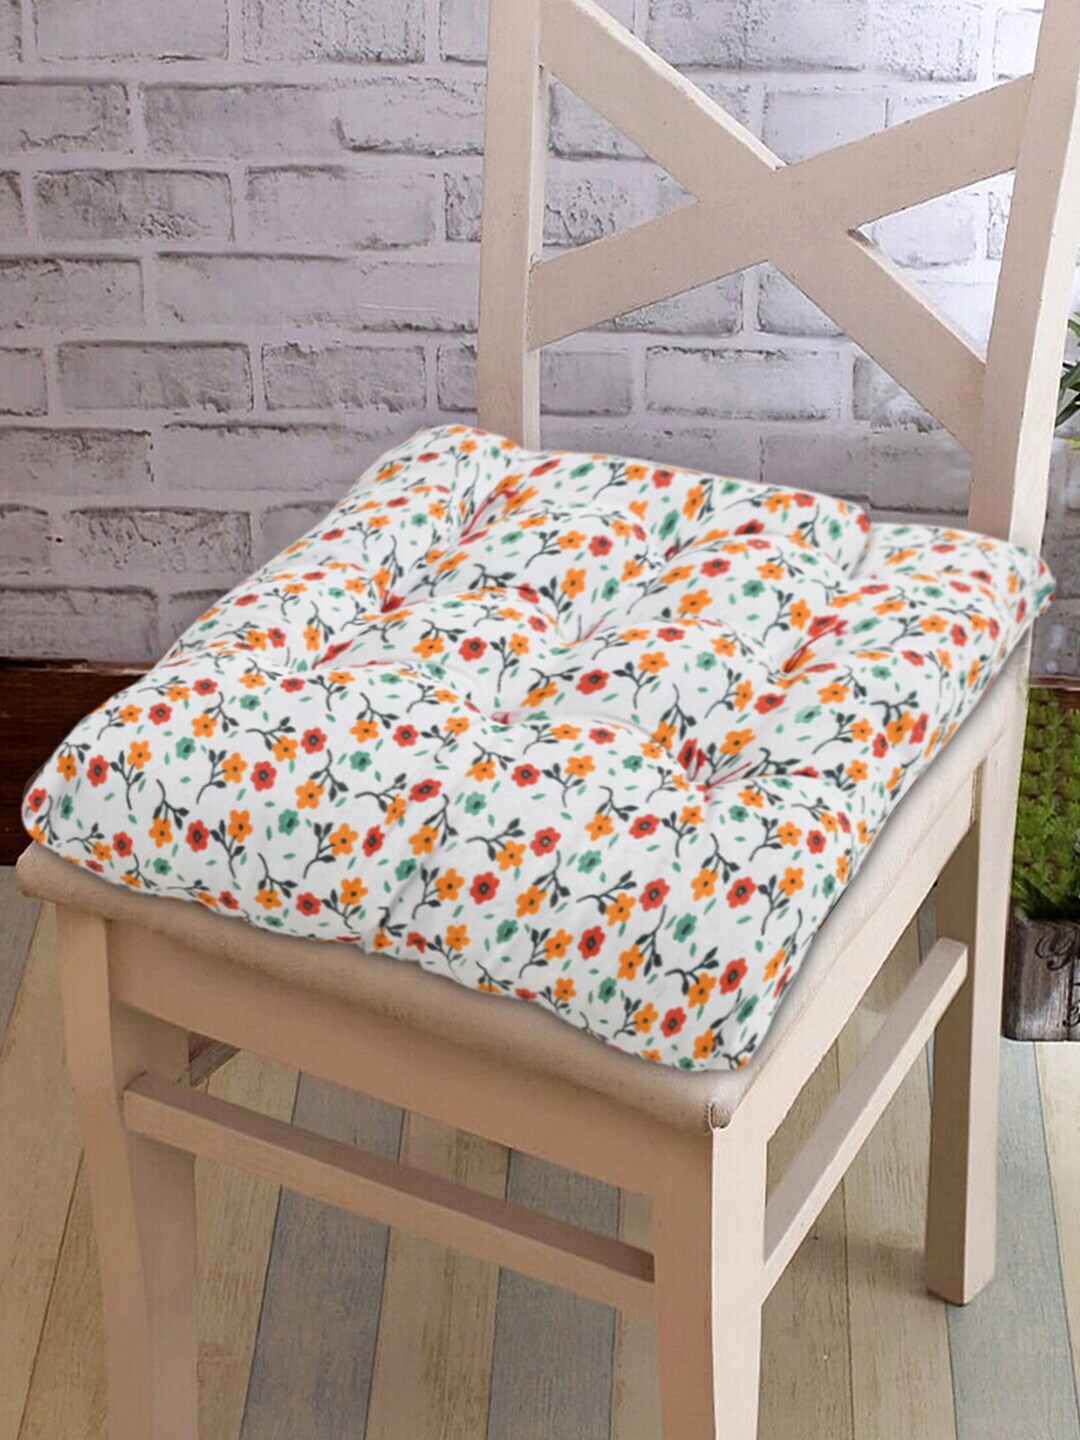 Kuber Industries White Floral Printed Microfiber Square Chair Pad Price in India